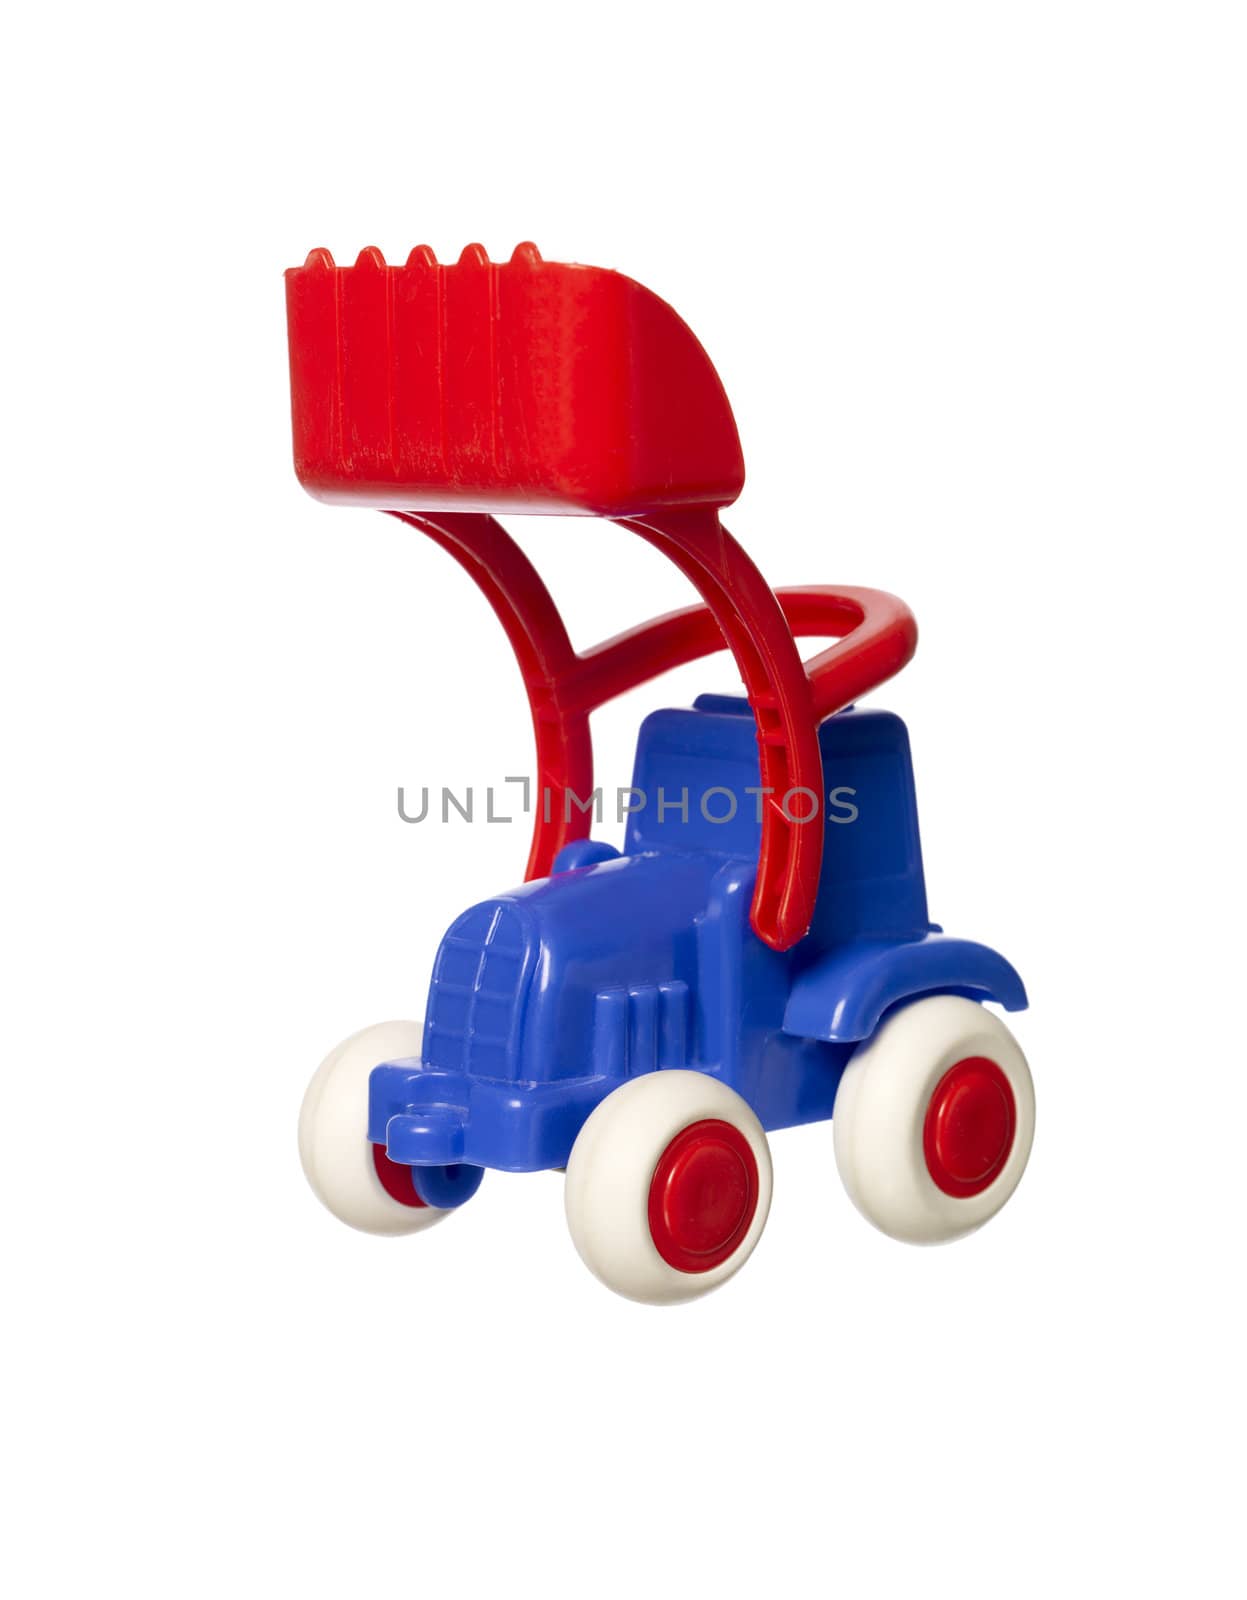 Toy tractor by gemenacom